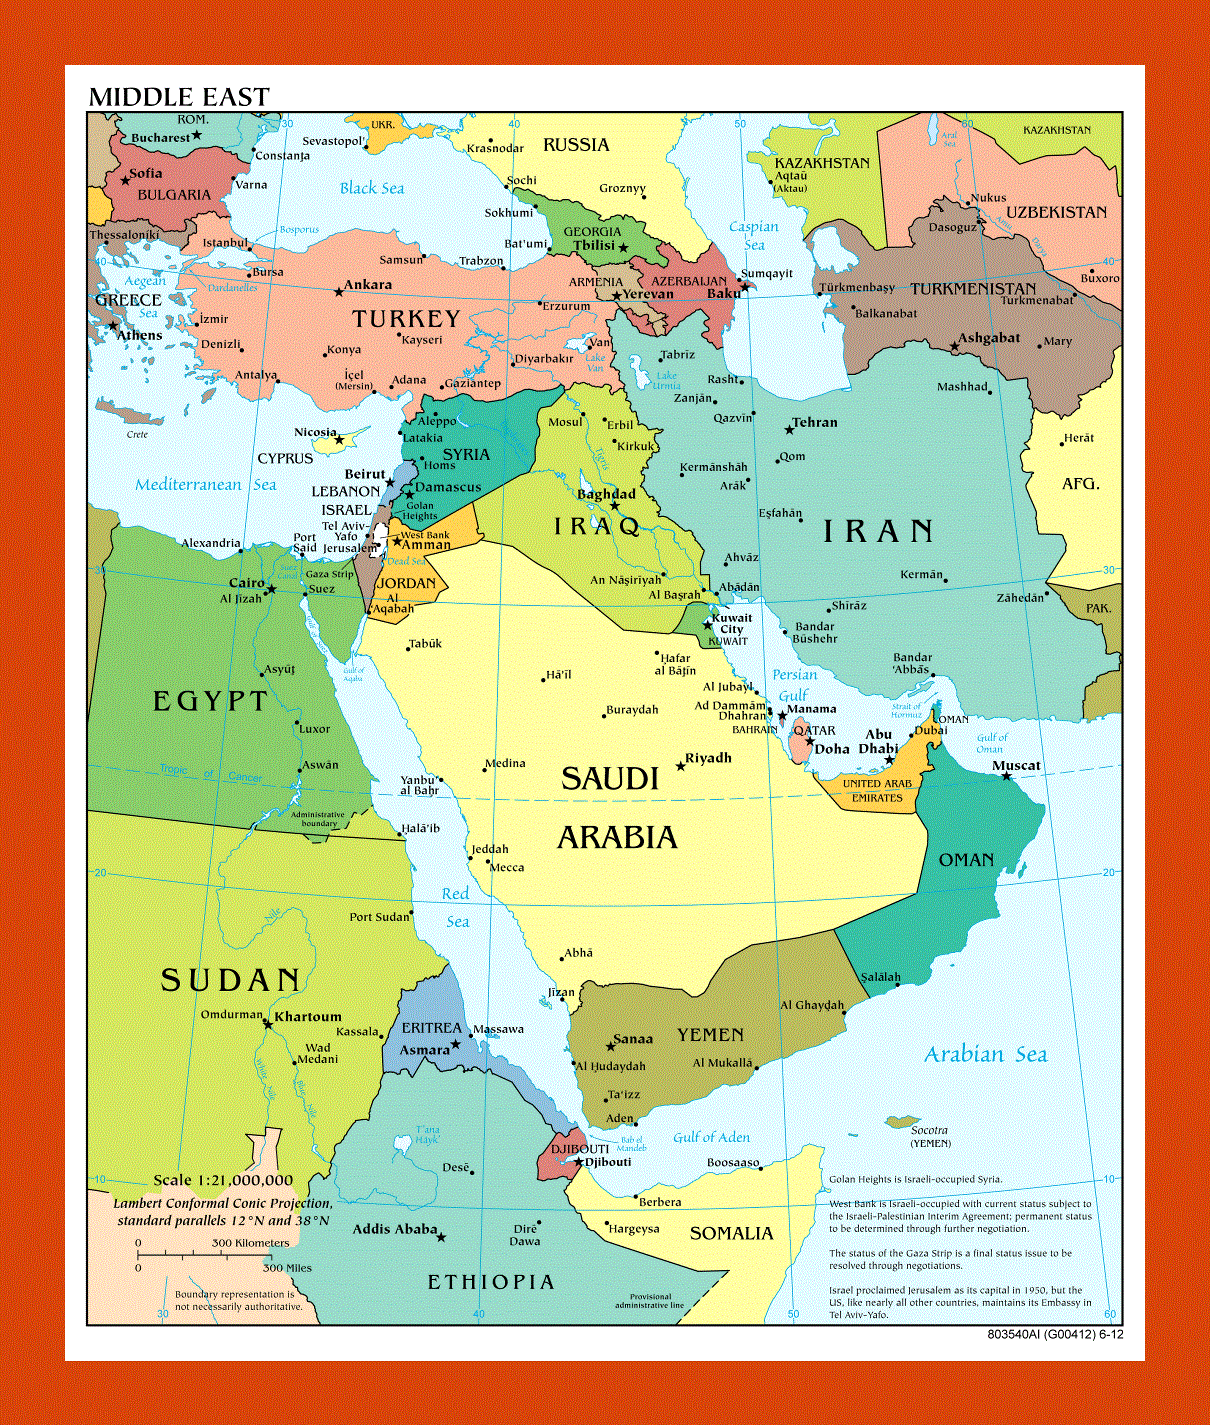 Political map of the Middle East - 2012